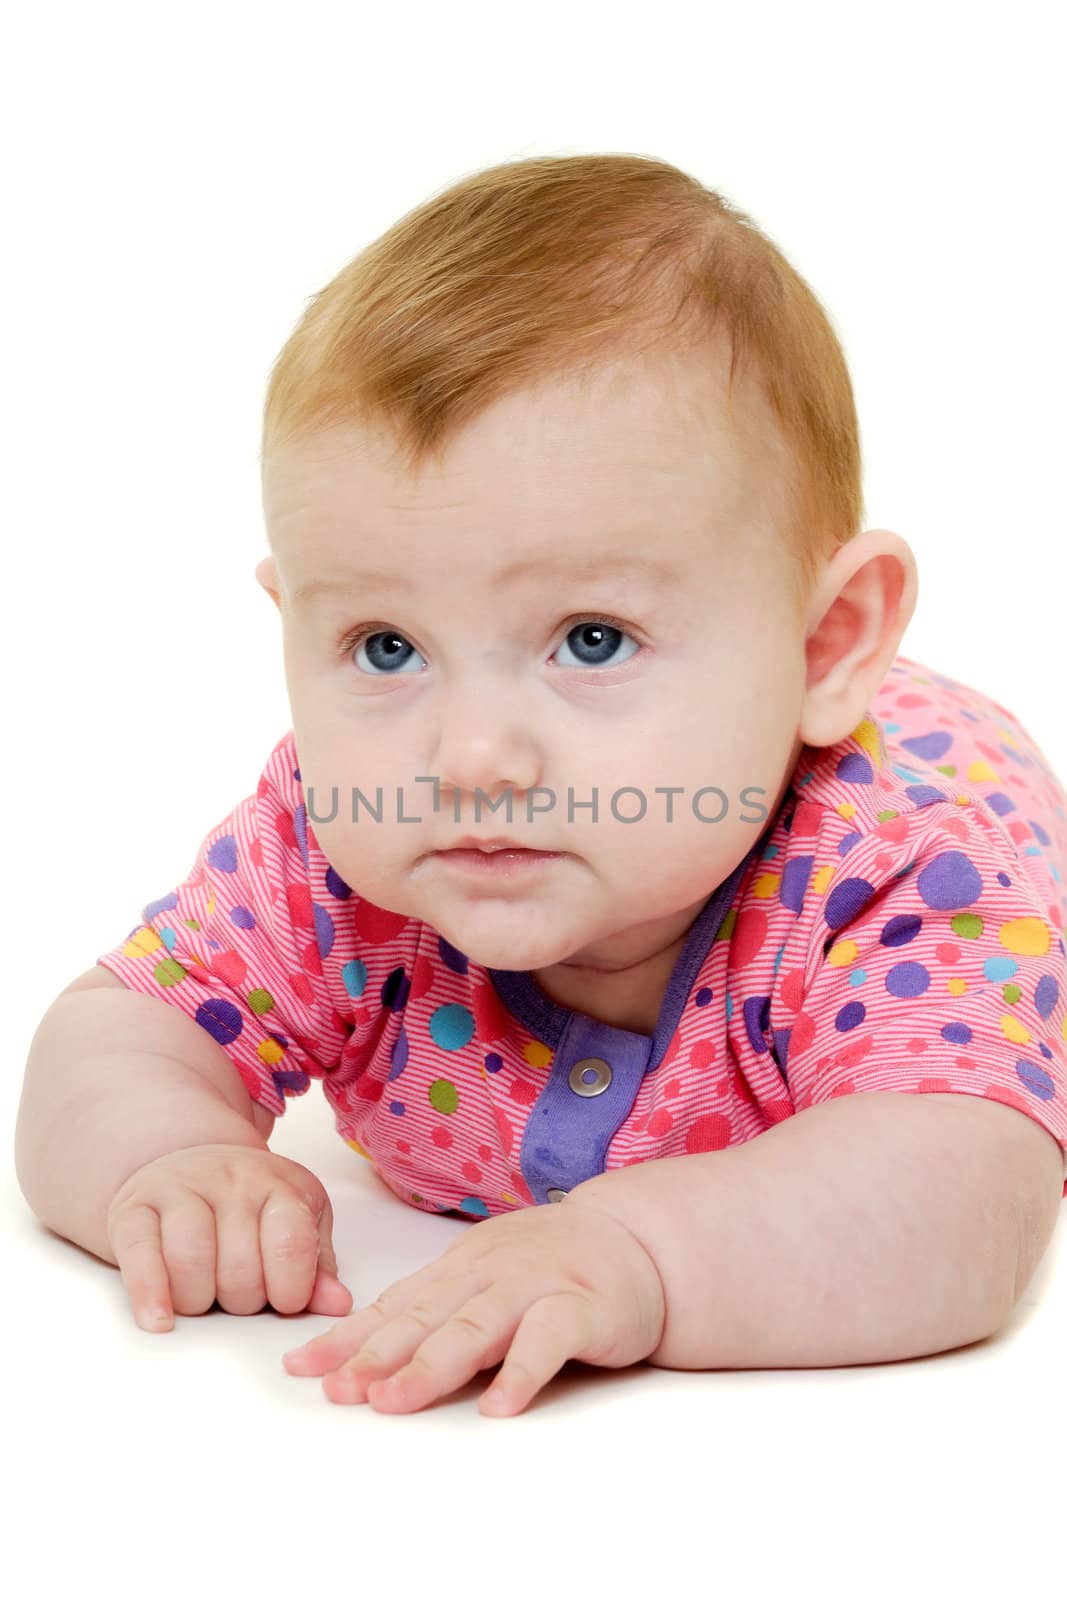 Baby on white background by cfoto